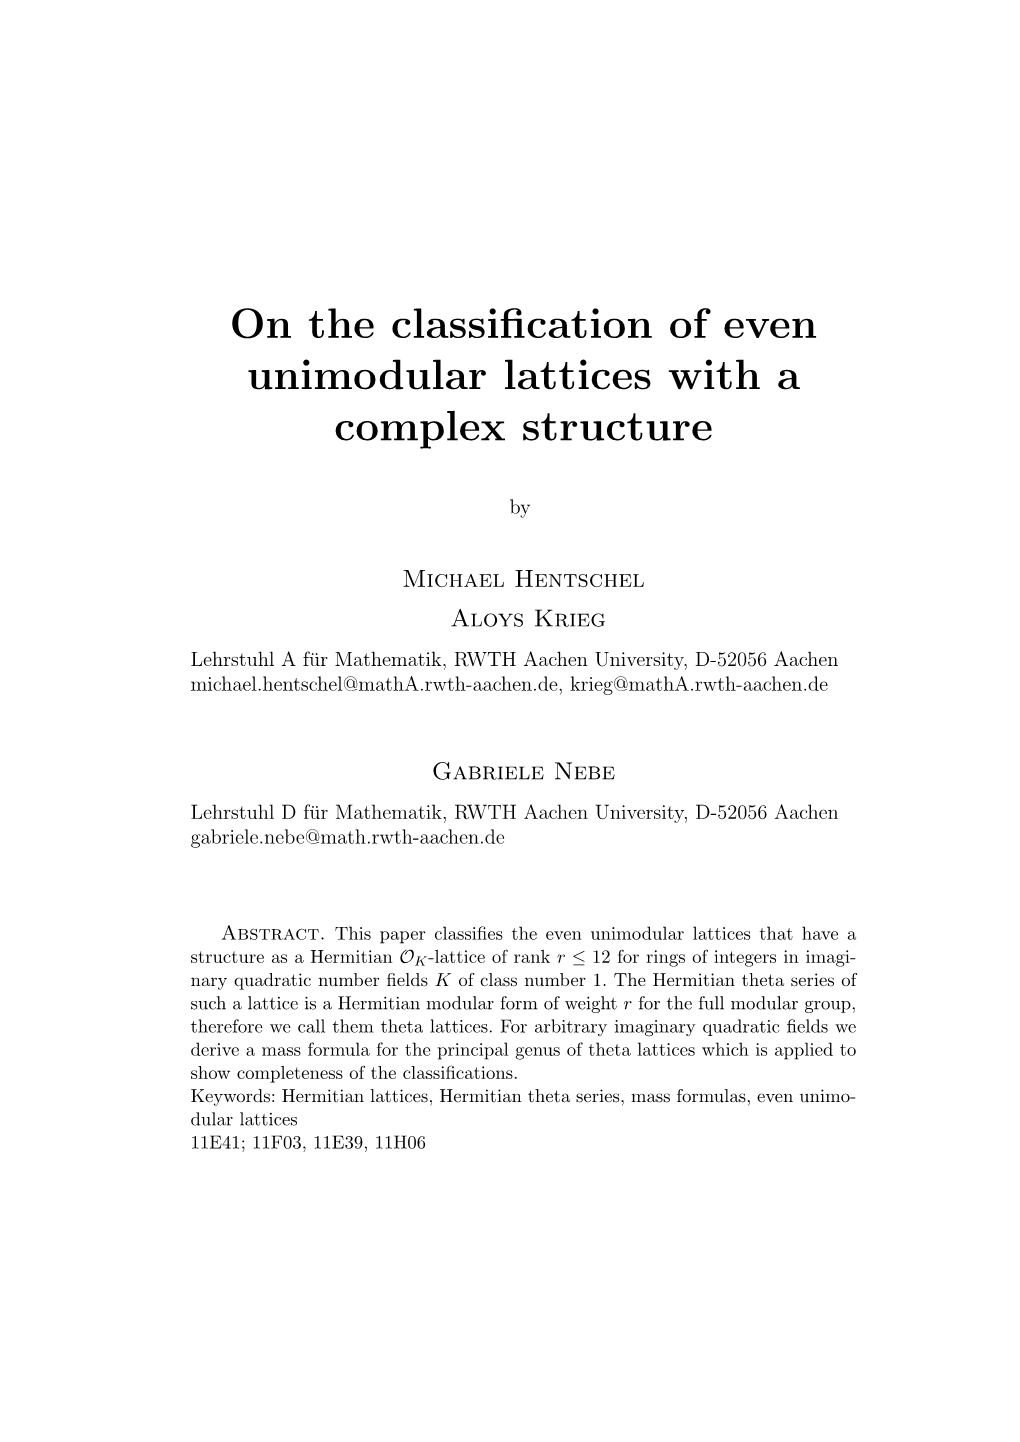 On the Classification of Even Unimodular Lattices with a Complex